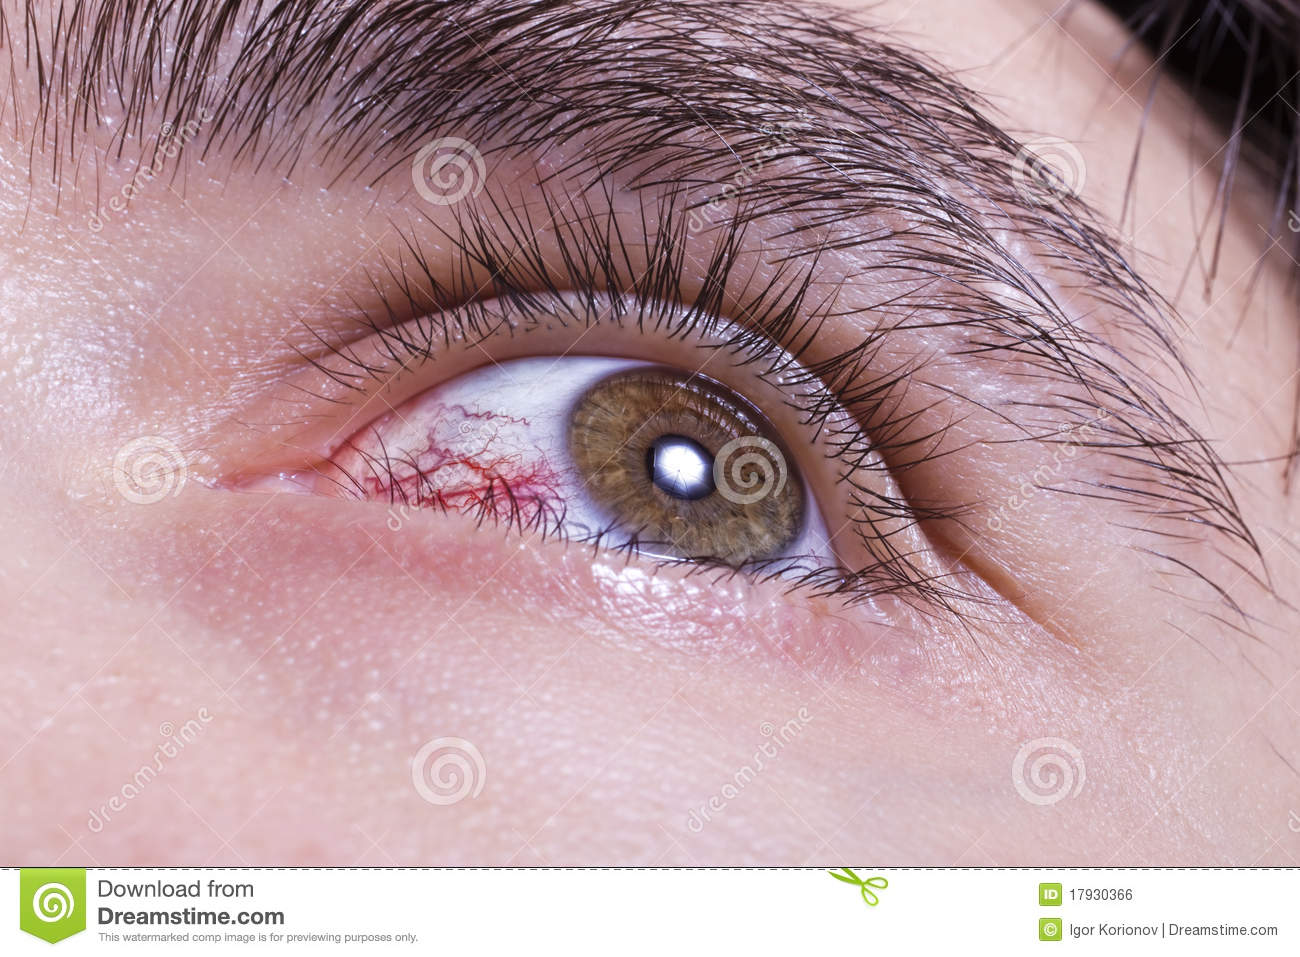 Green Men Eye With Red Blood Vessels Royalty Free Stock Image   Image